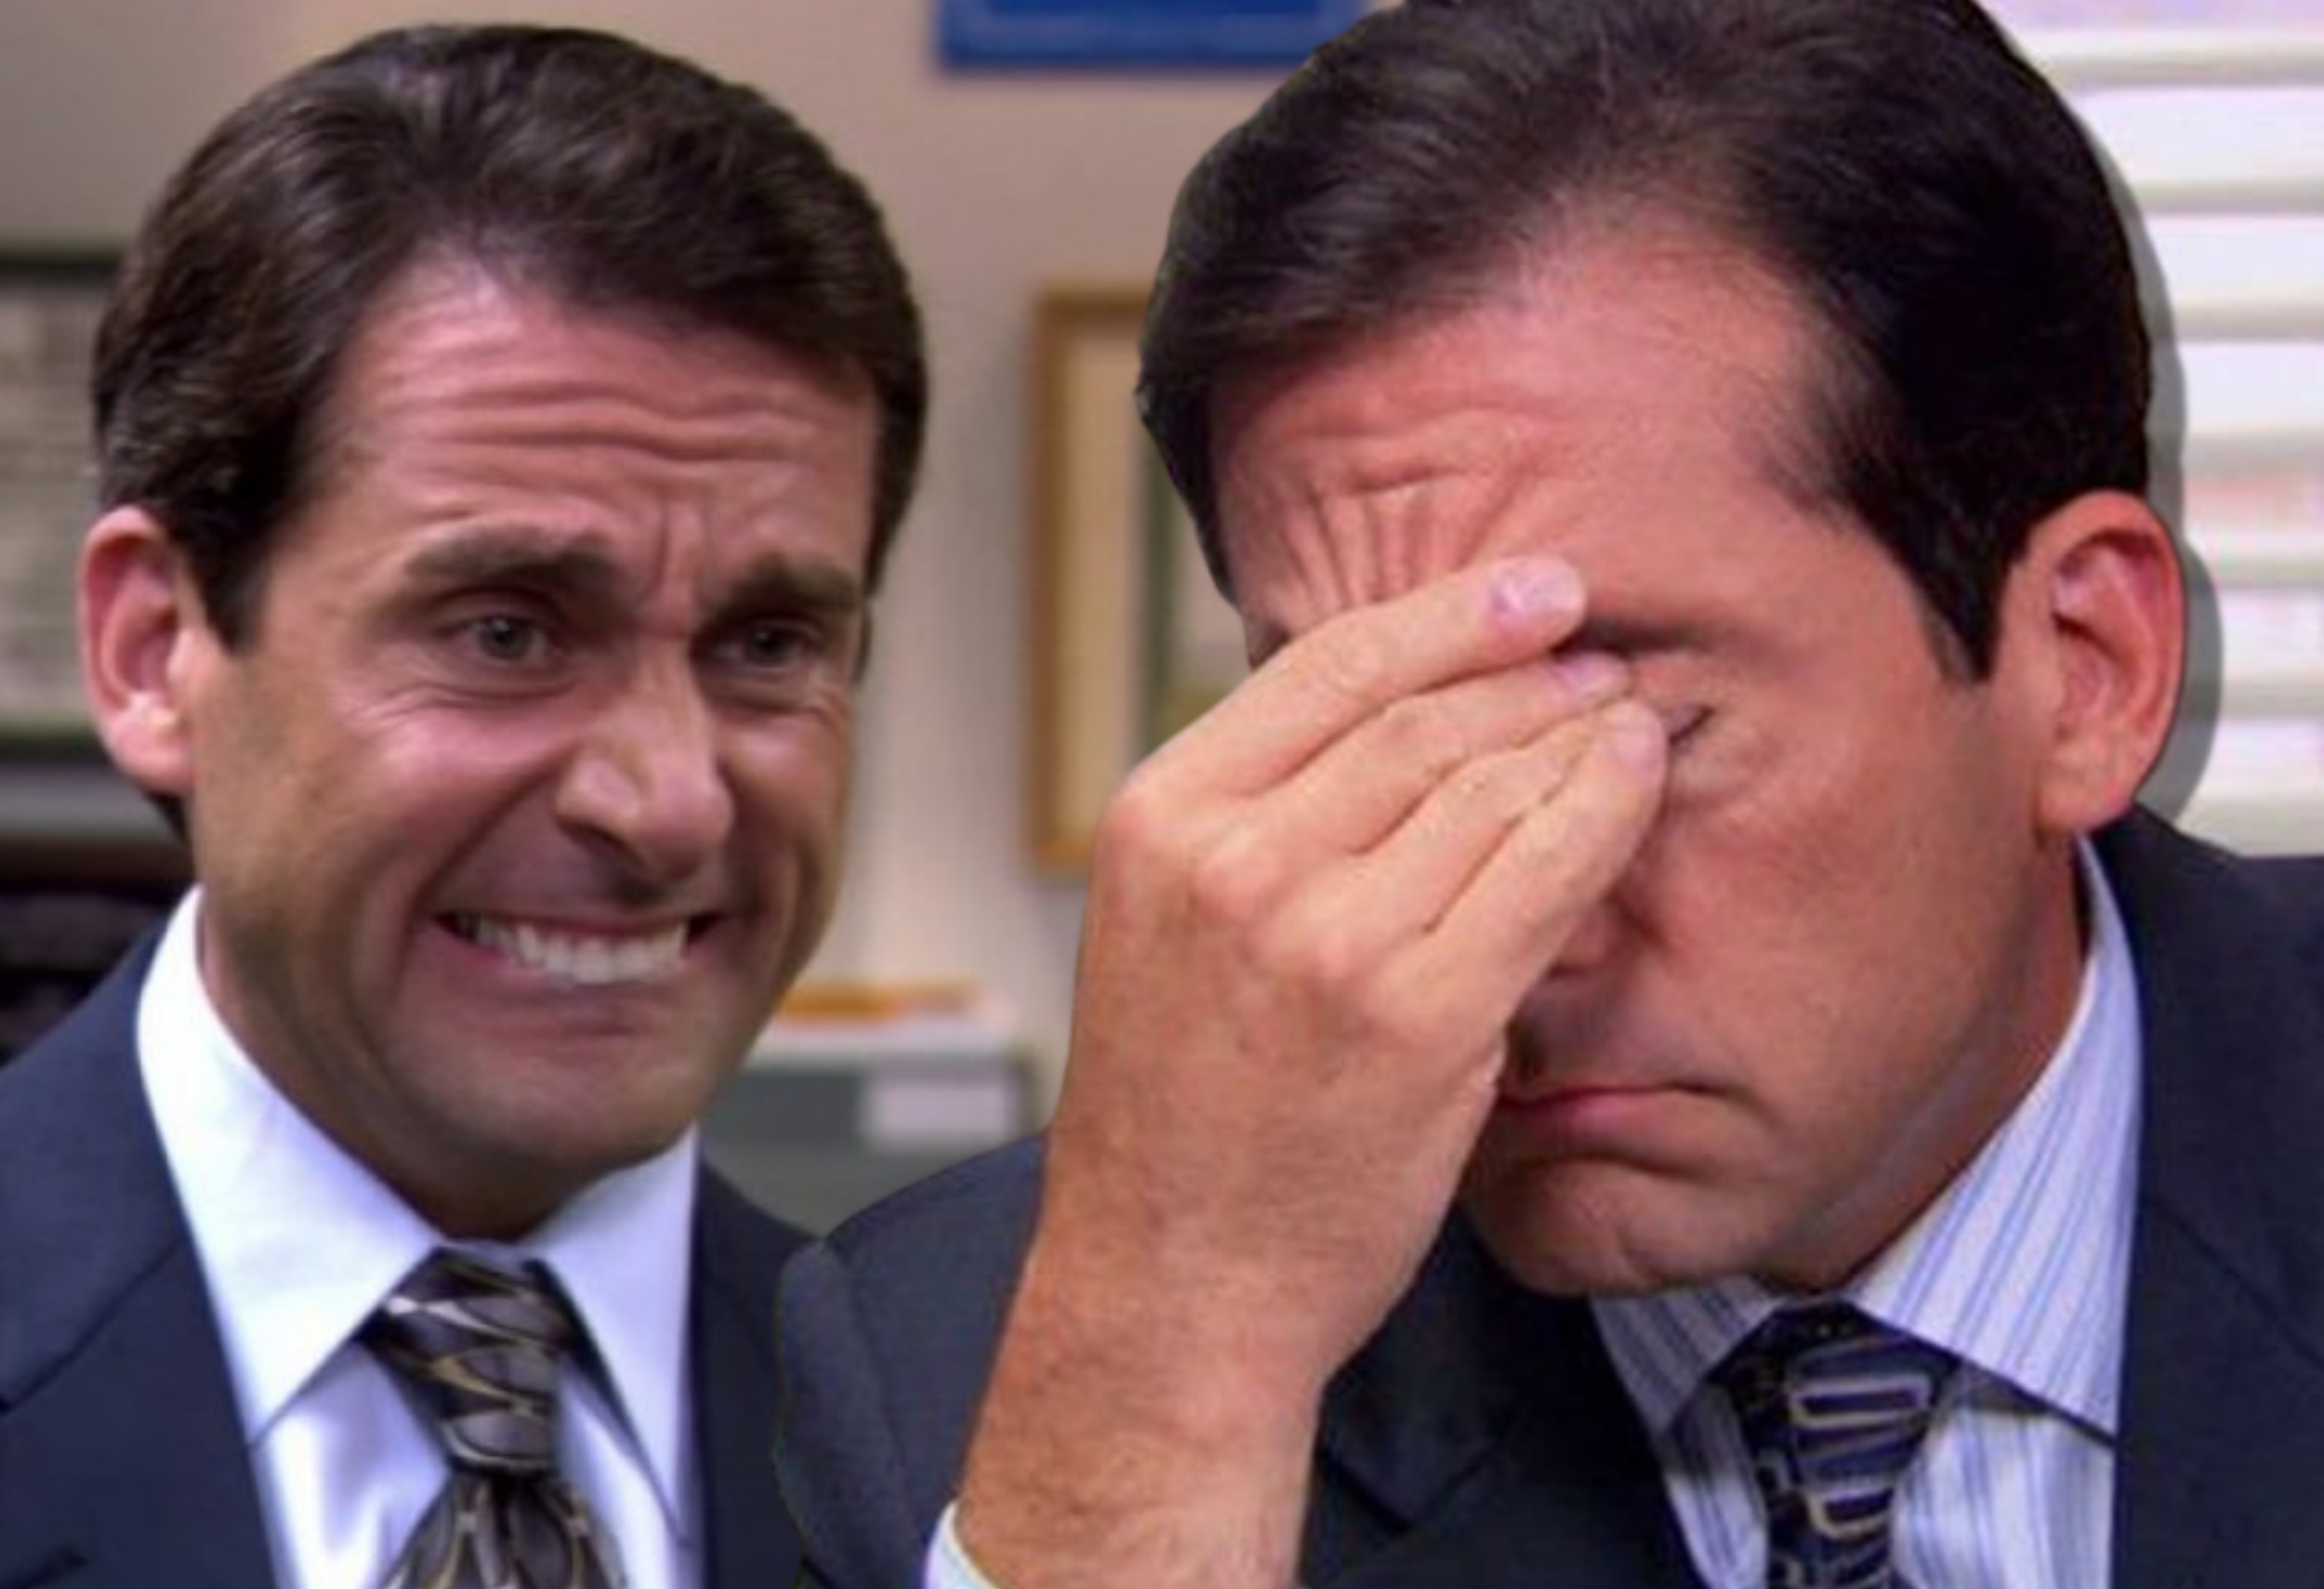 The Office': 5 Controversial Episodes That Haven't Aged Well